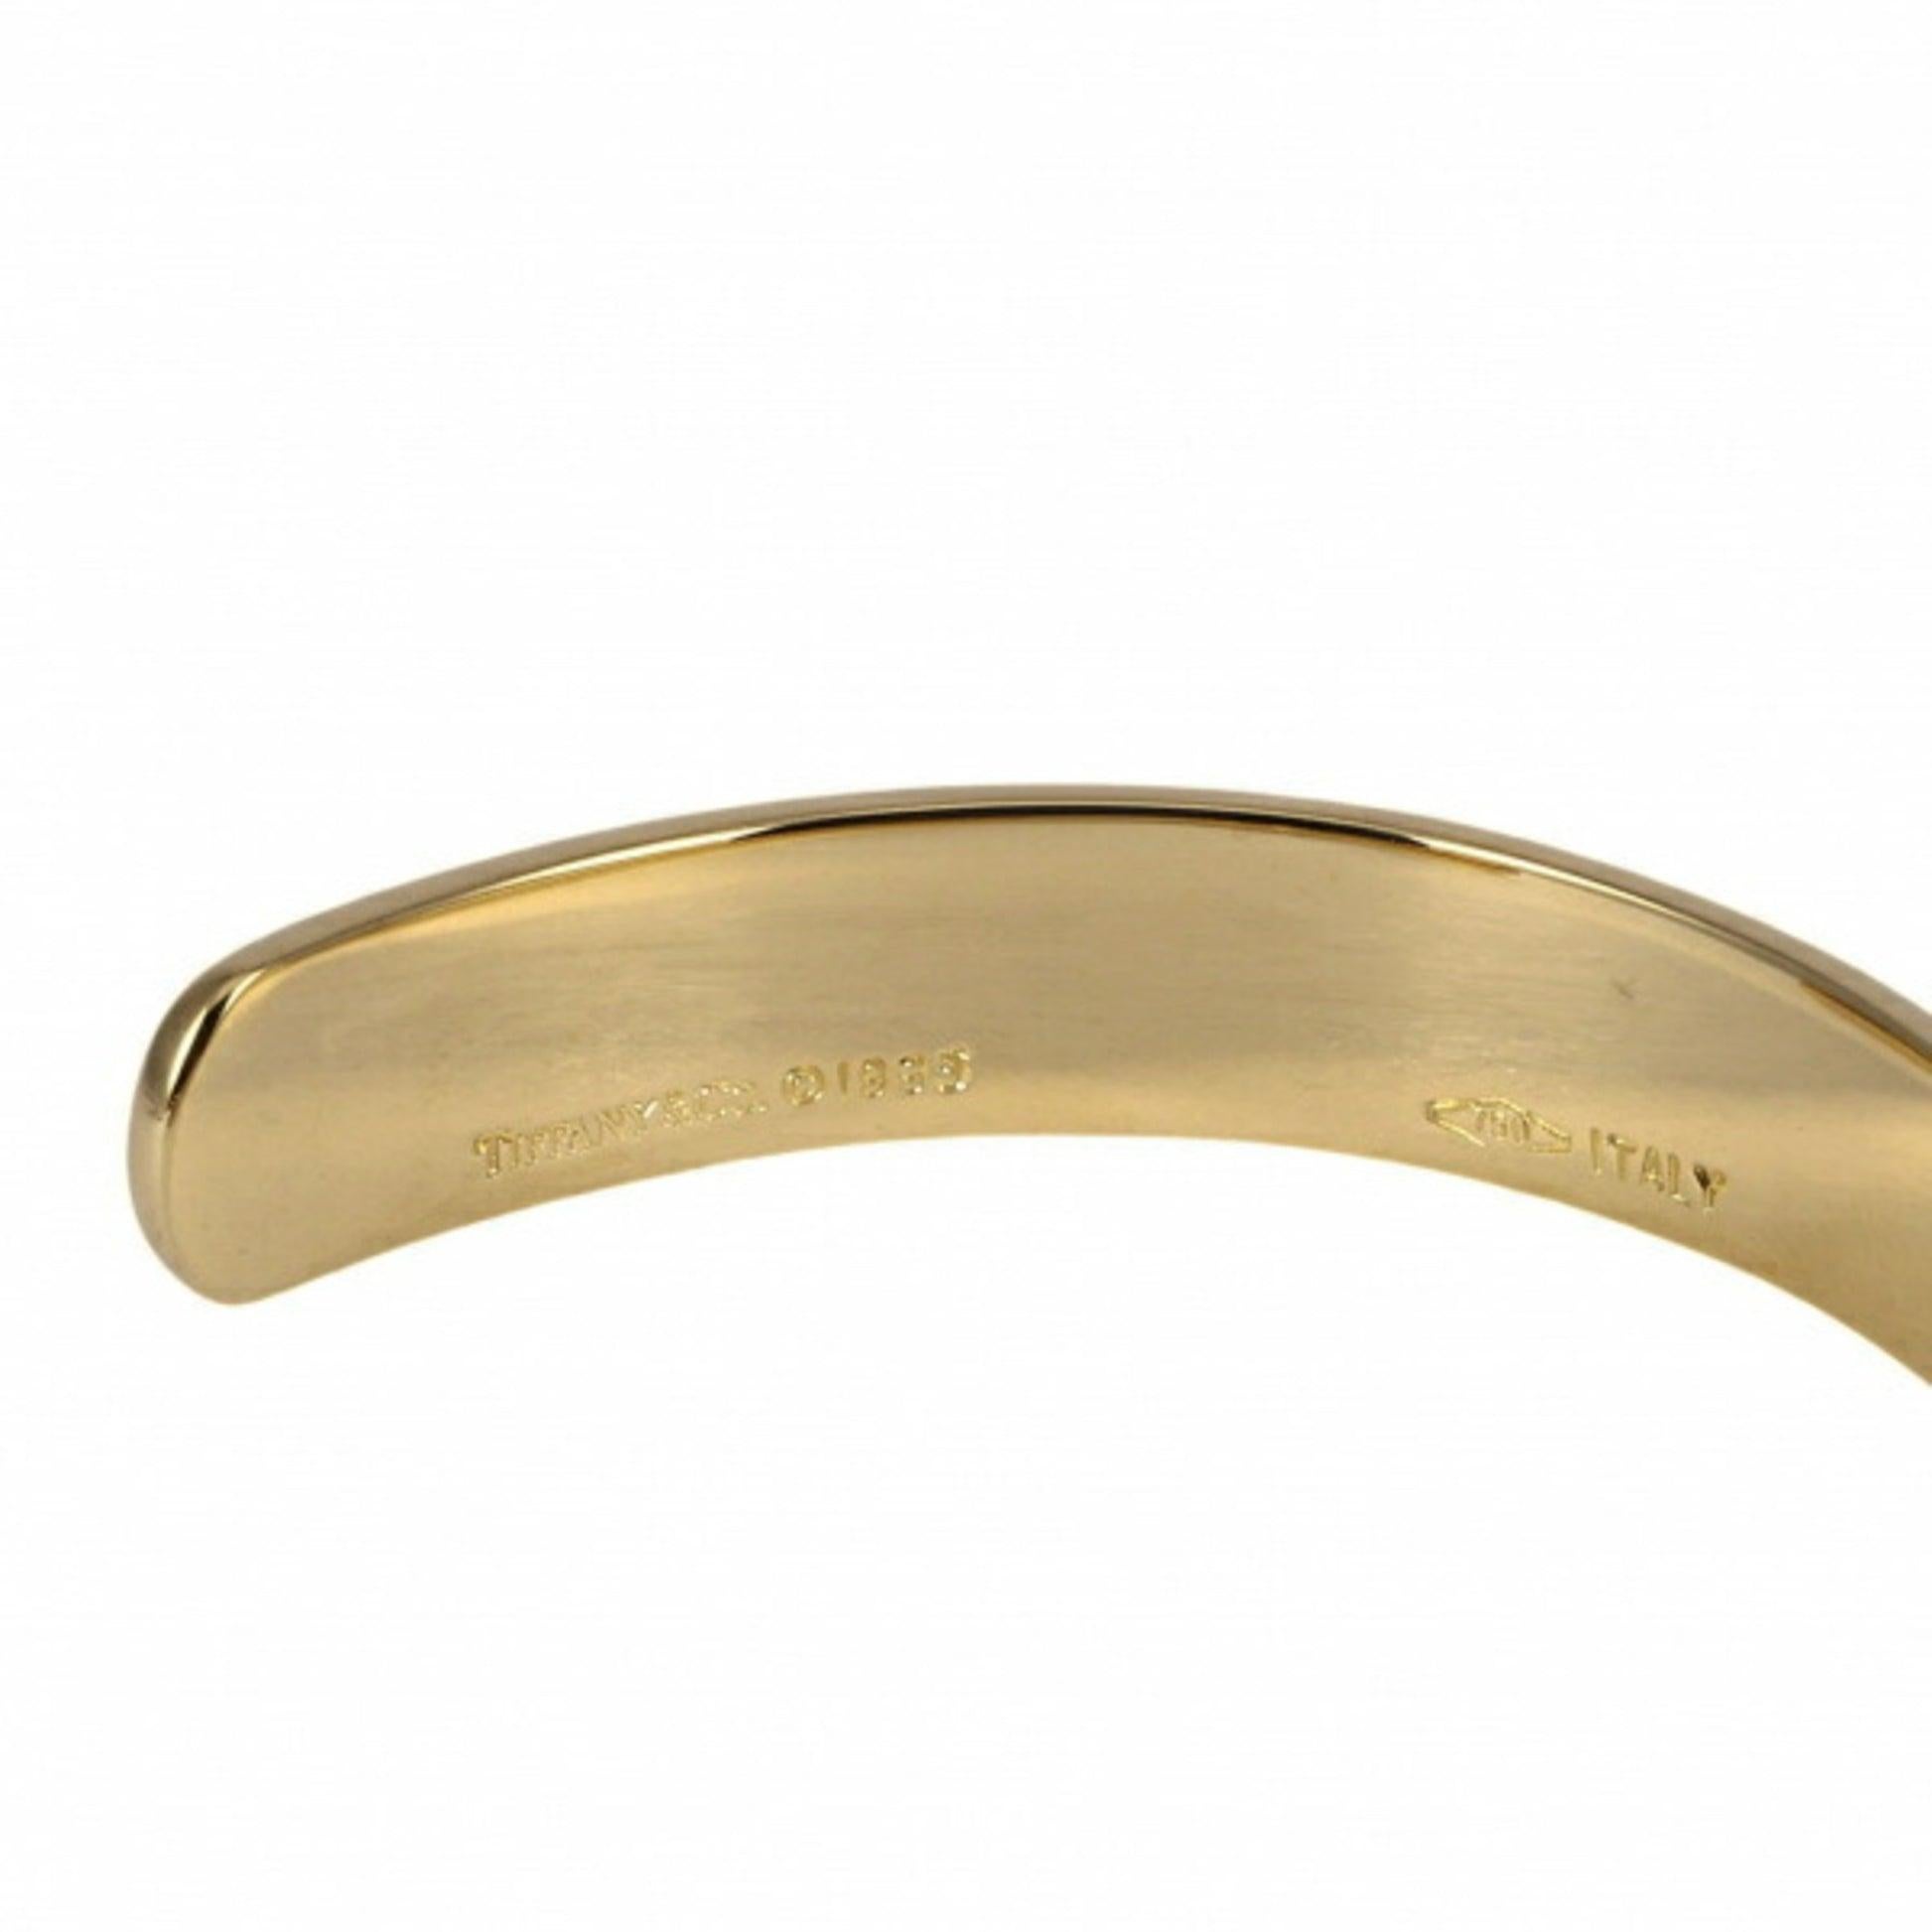 Tiffany Atlas Bracelet in 18K Yellow Gold

Additional Information:
Brand: Tiffany
Line: Atlas
Color: Yellow
Material: Yellow gold (18K)
Condition details: This item has been used and may have some minor flaws. Before purchasing, please refer to the